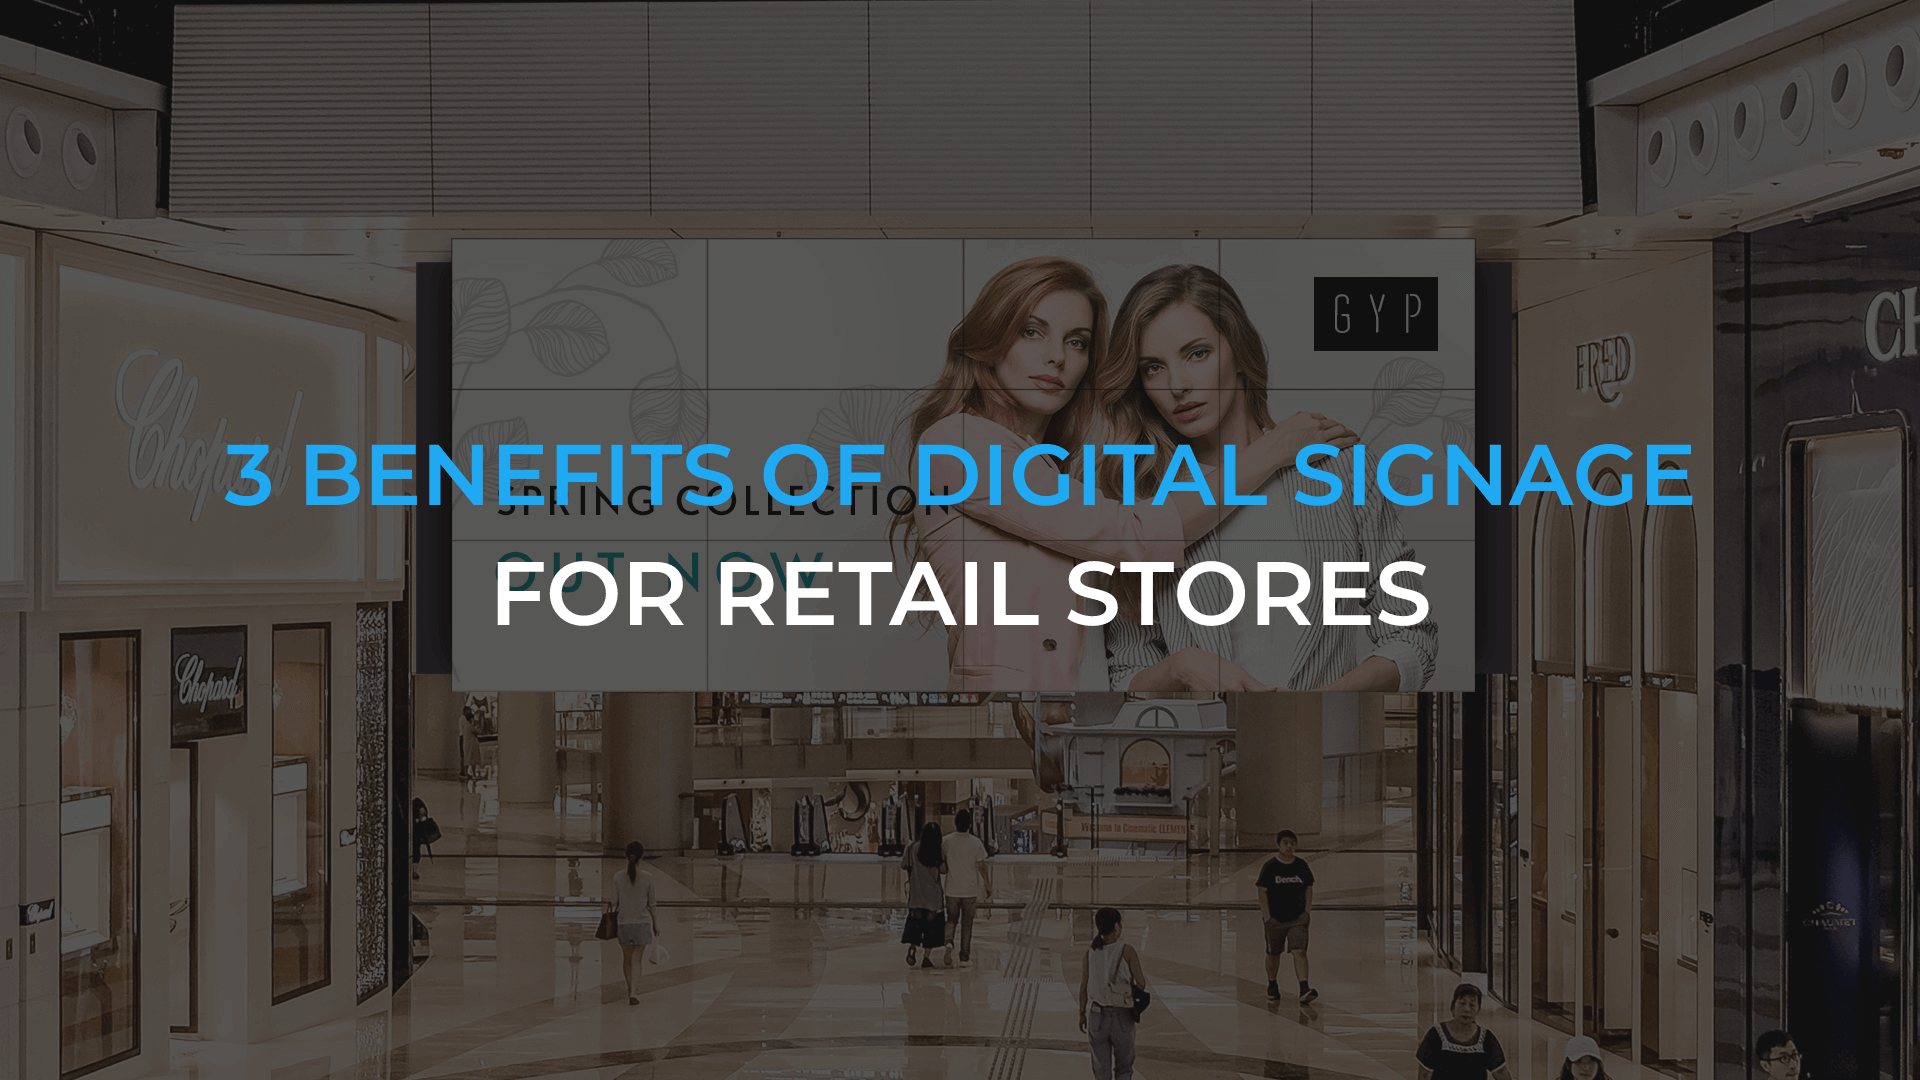 3 benefits of digital signage for retail stores